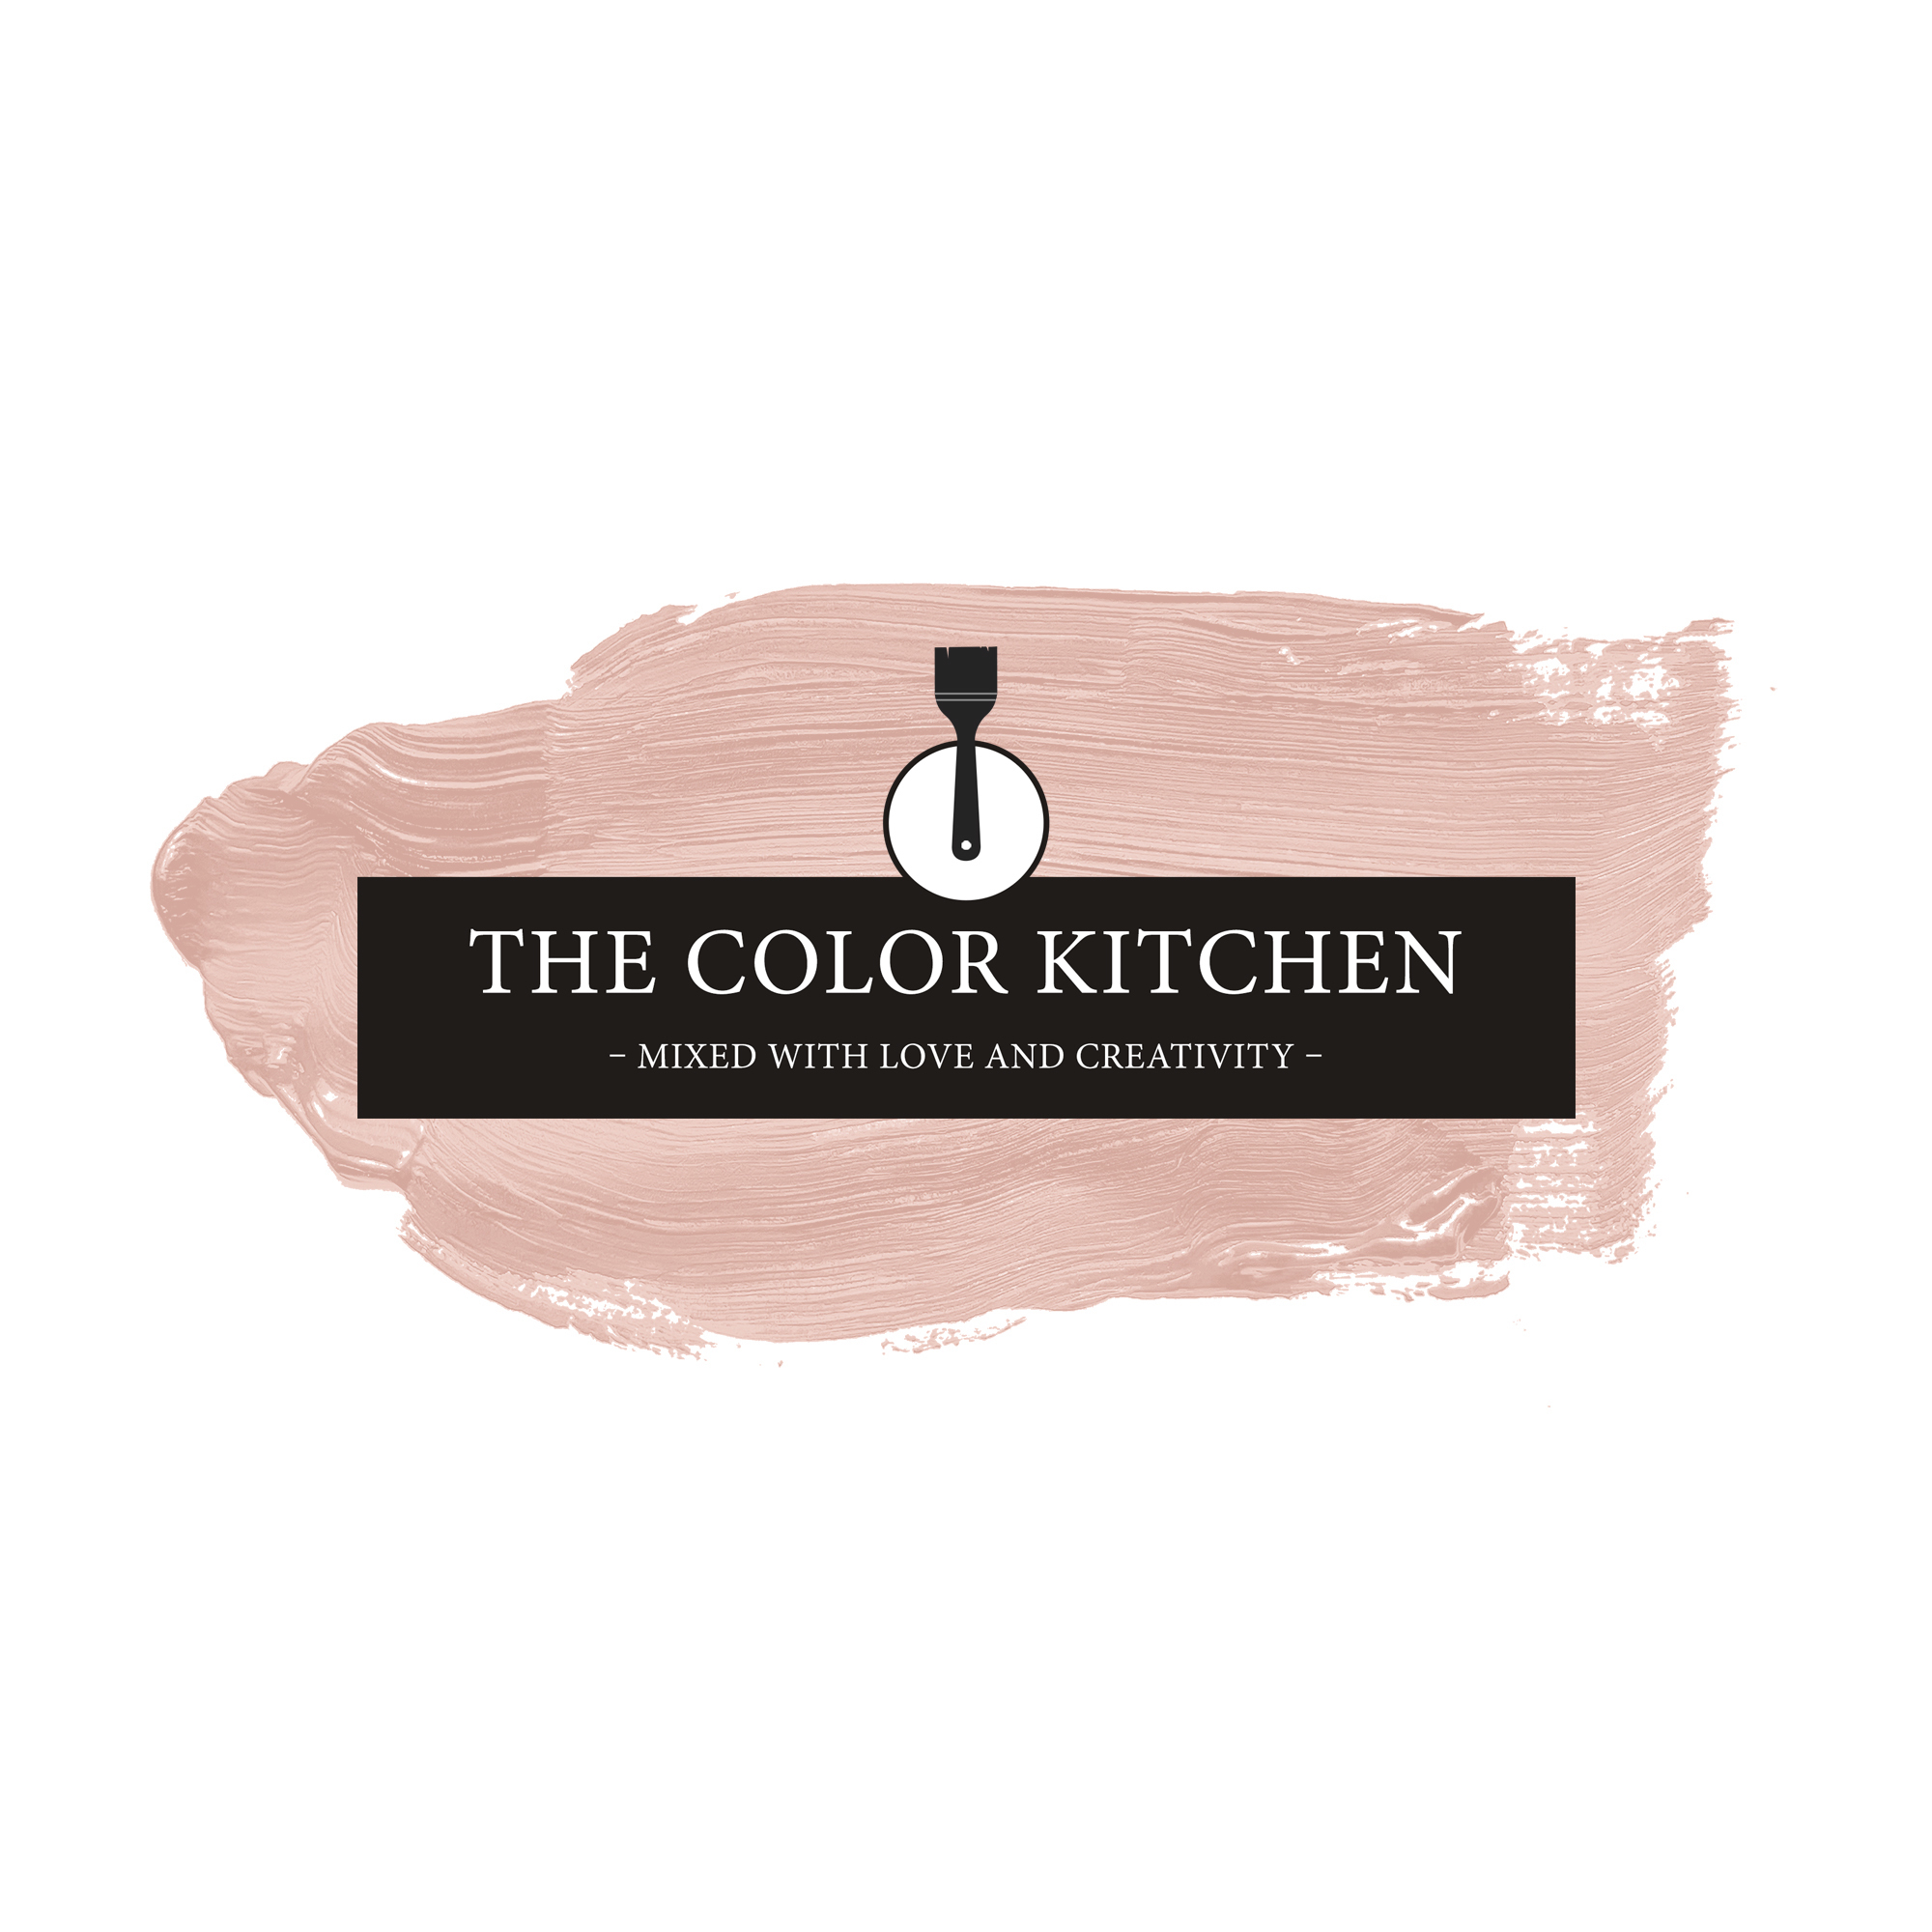 The Color Kitchen Sweet Strawberry 2,5 l